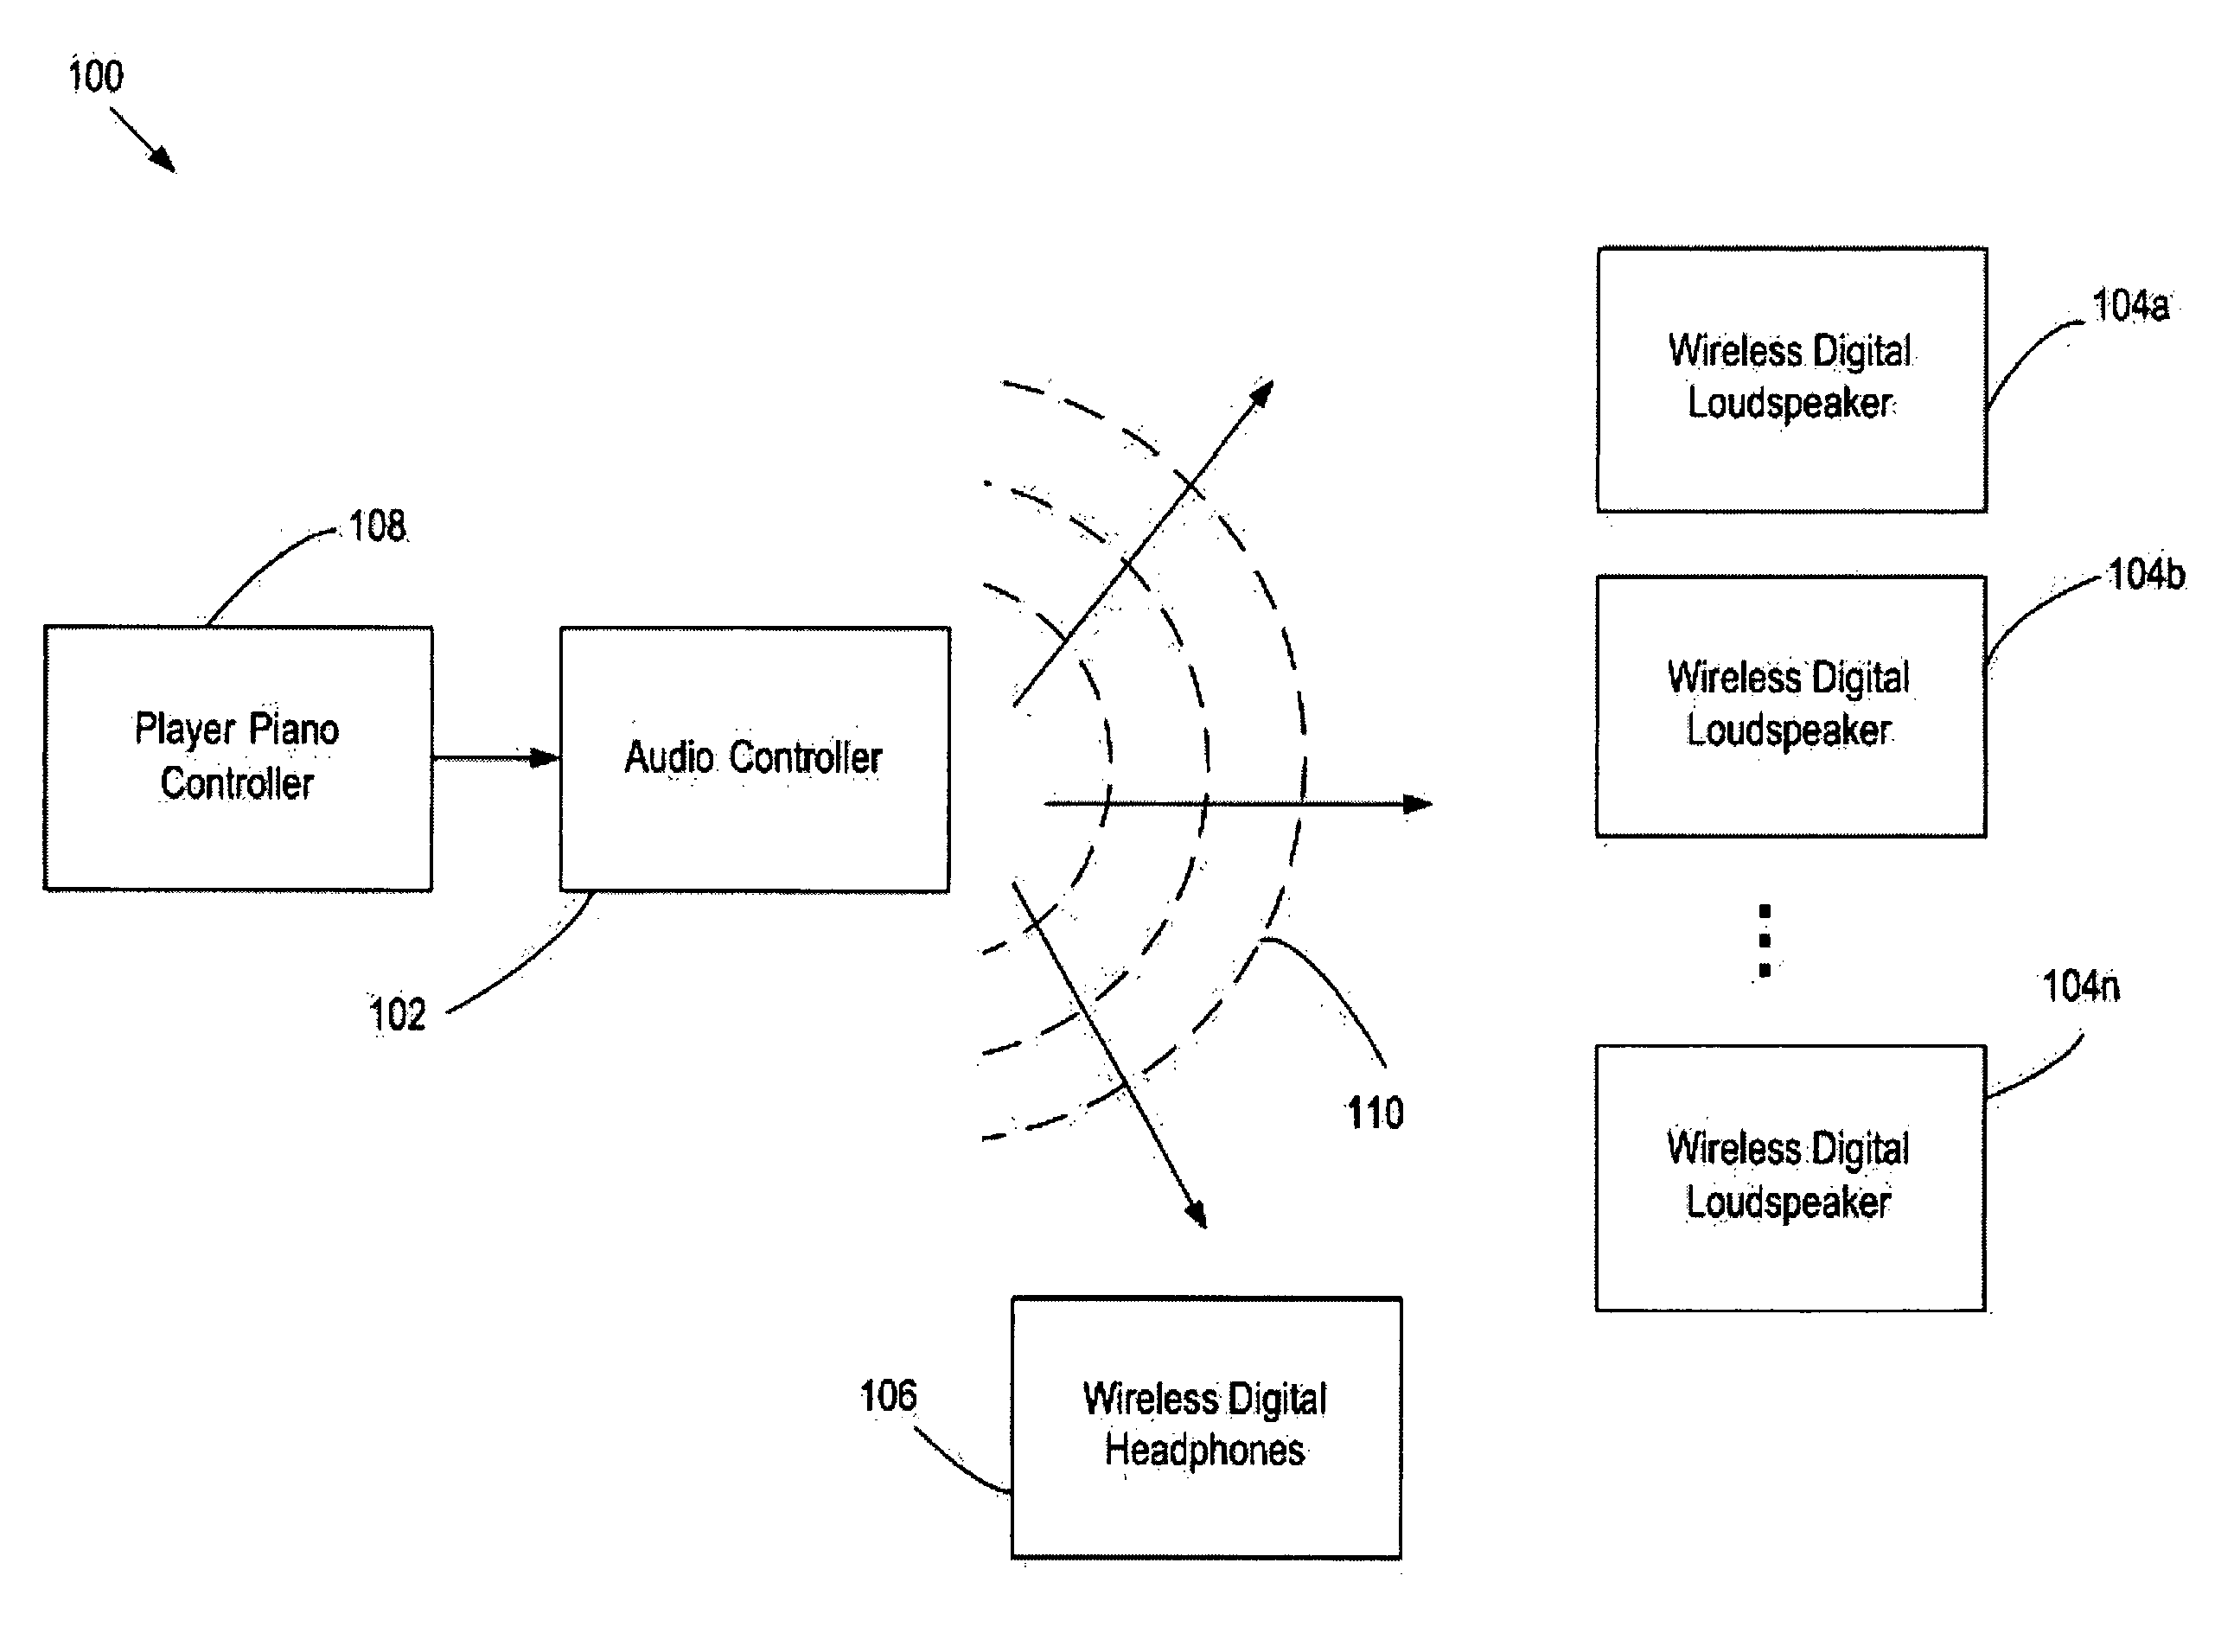 Method and apparatus for wireless digital audio playback for player piano applications